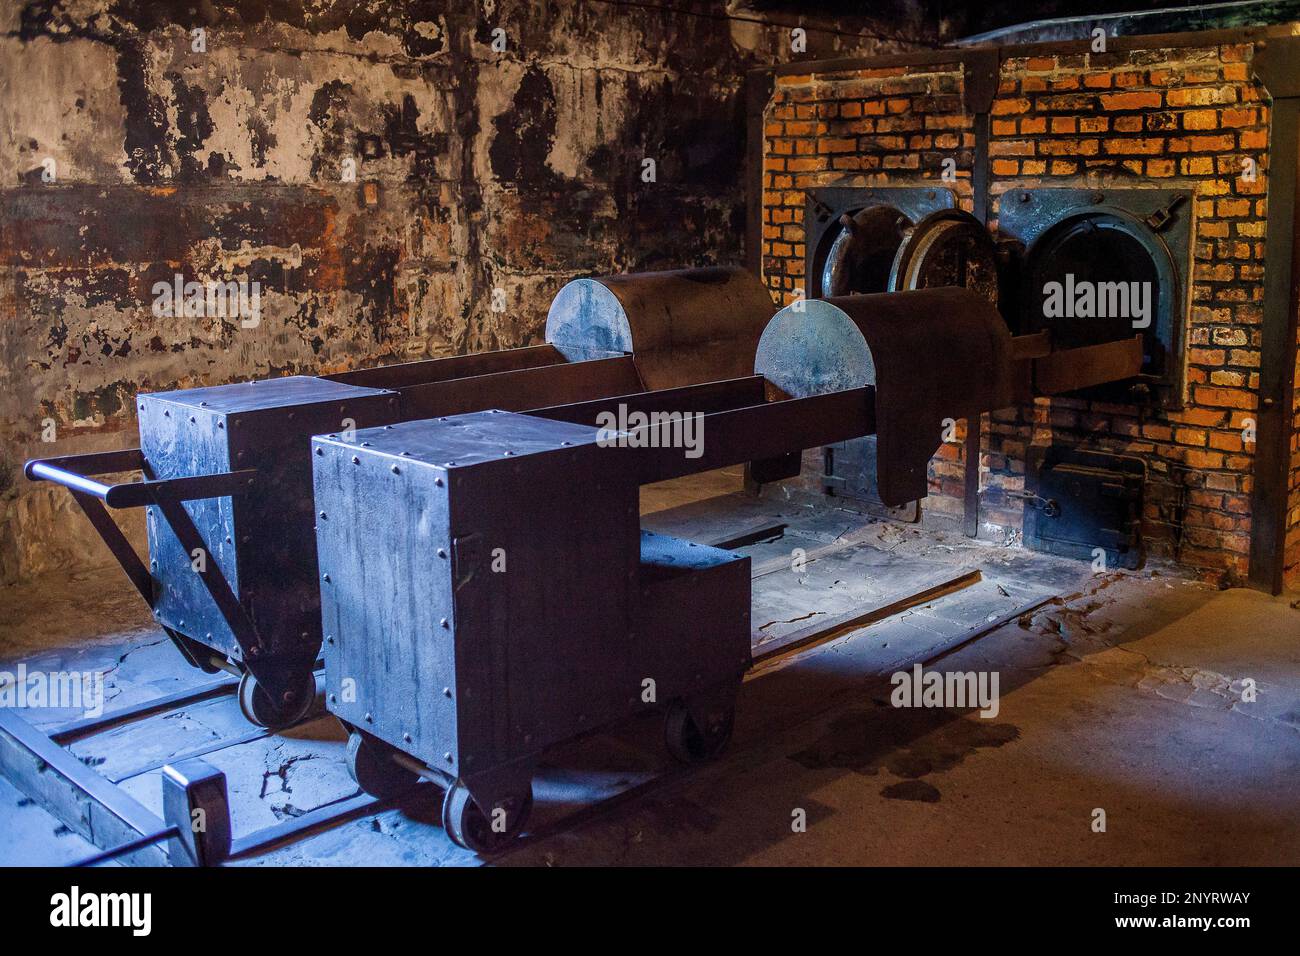 Oven for incineration dead bodies, in concentration camp. Auschwitz. Poland. Stock Photo